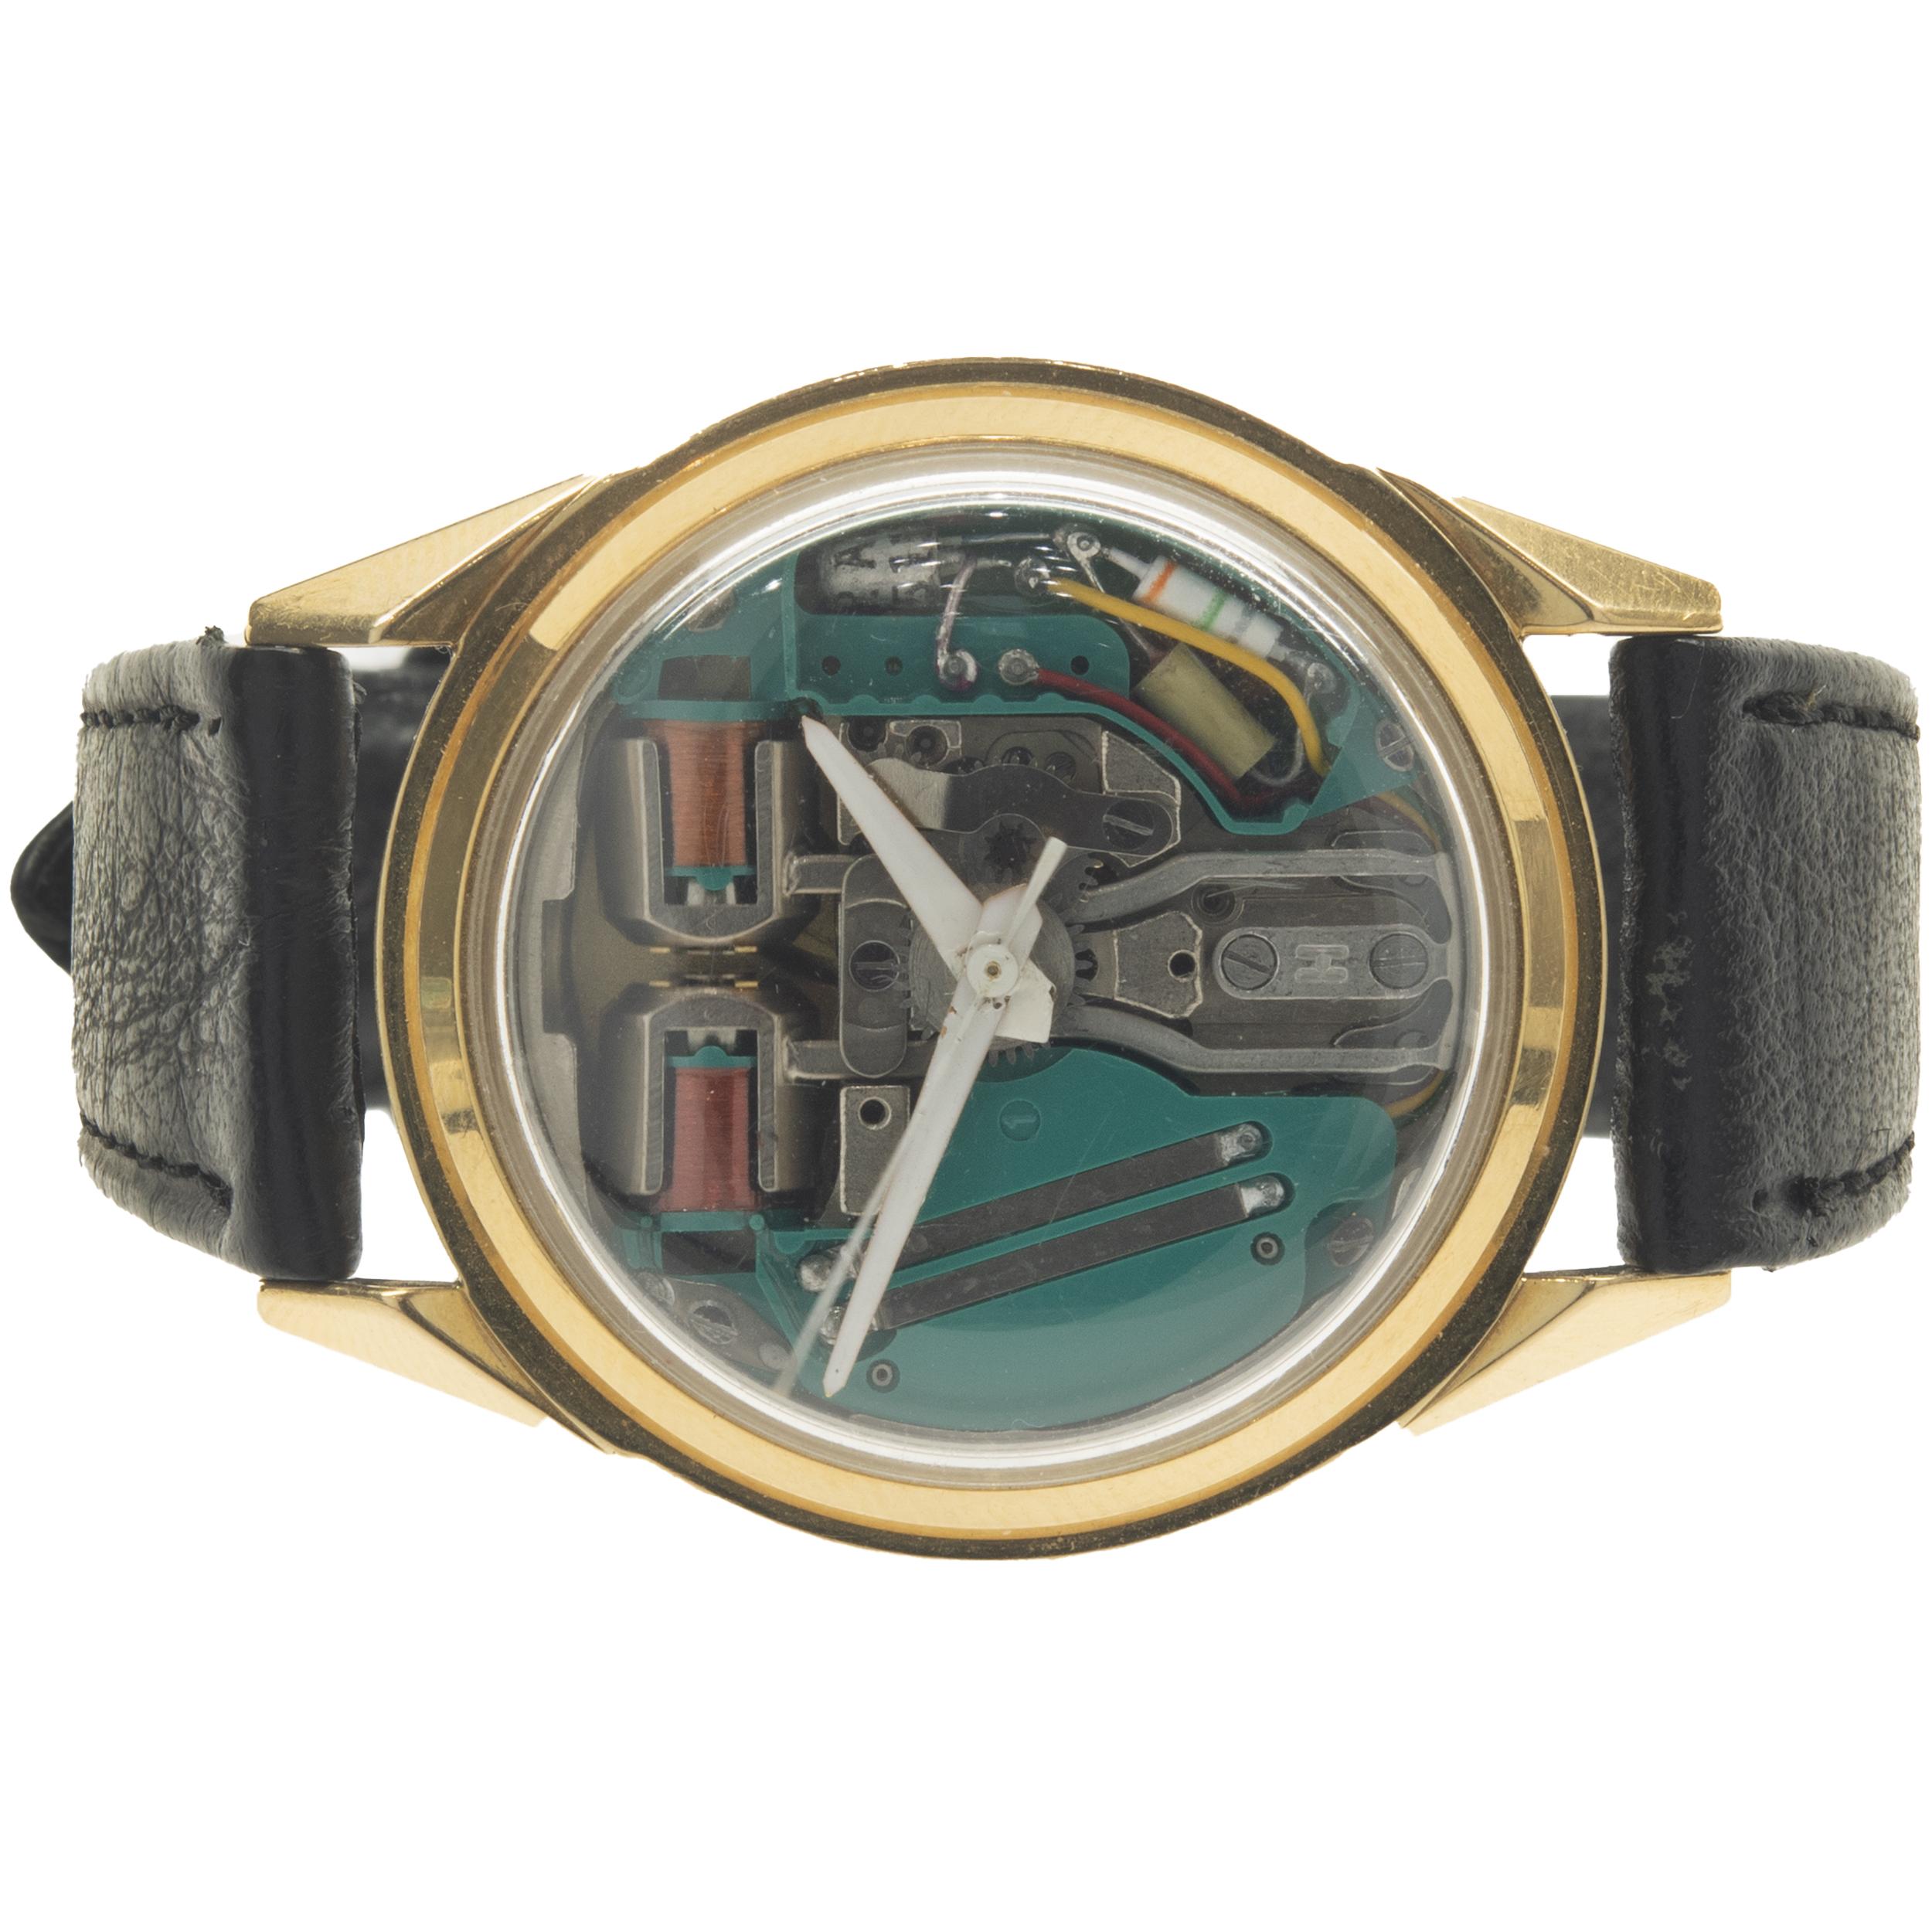 Movement: quartz
Function: hours, minutes, seconds
Case: 34mm 18k yellow gold case, plastic protective crystal
Band: black leather strap, buckle
Dial: skeleton dial
Serial: D84XXX

No box or papers included
Guaranteed to be authentic by seller.